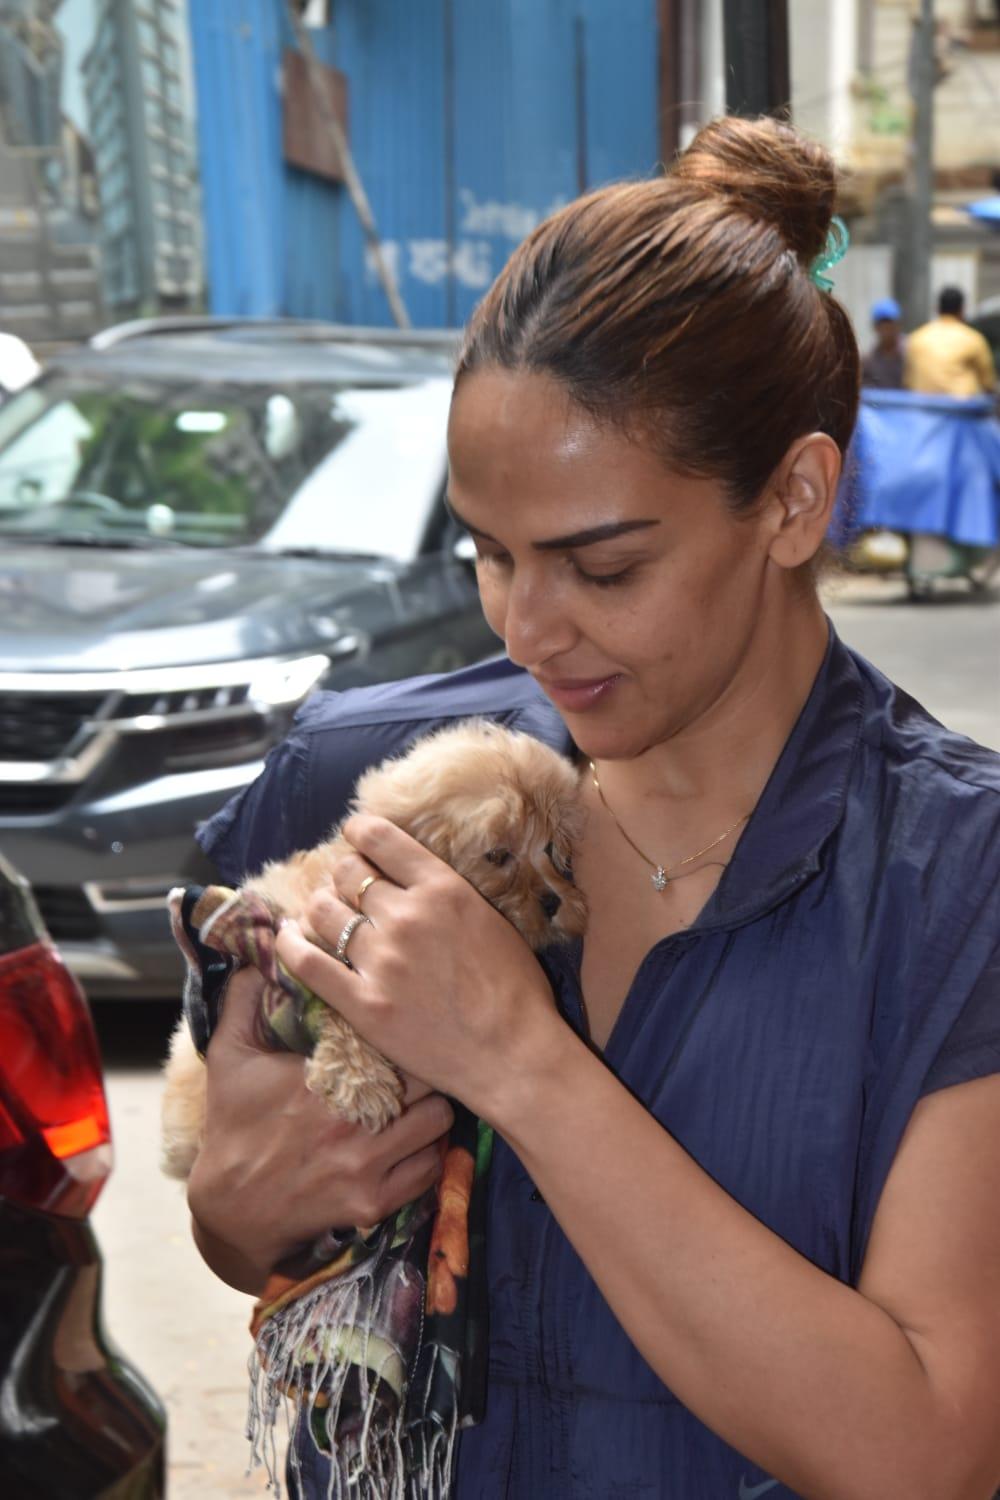 Esha Deol was snapped at a vet clinic in Khar, with an adorable little friend!